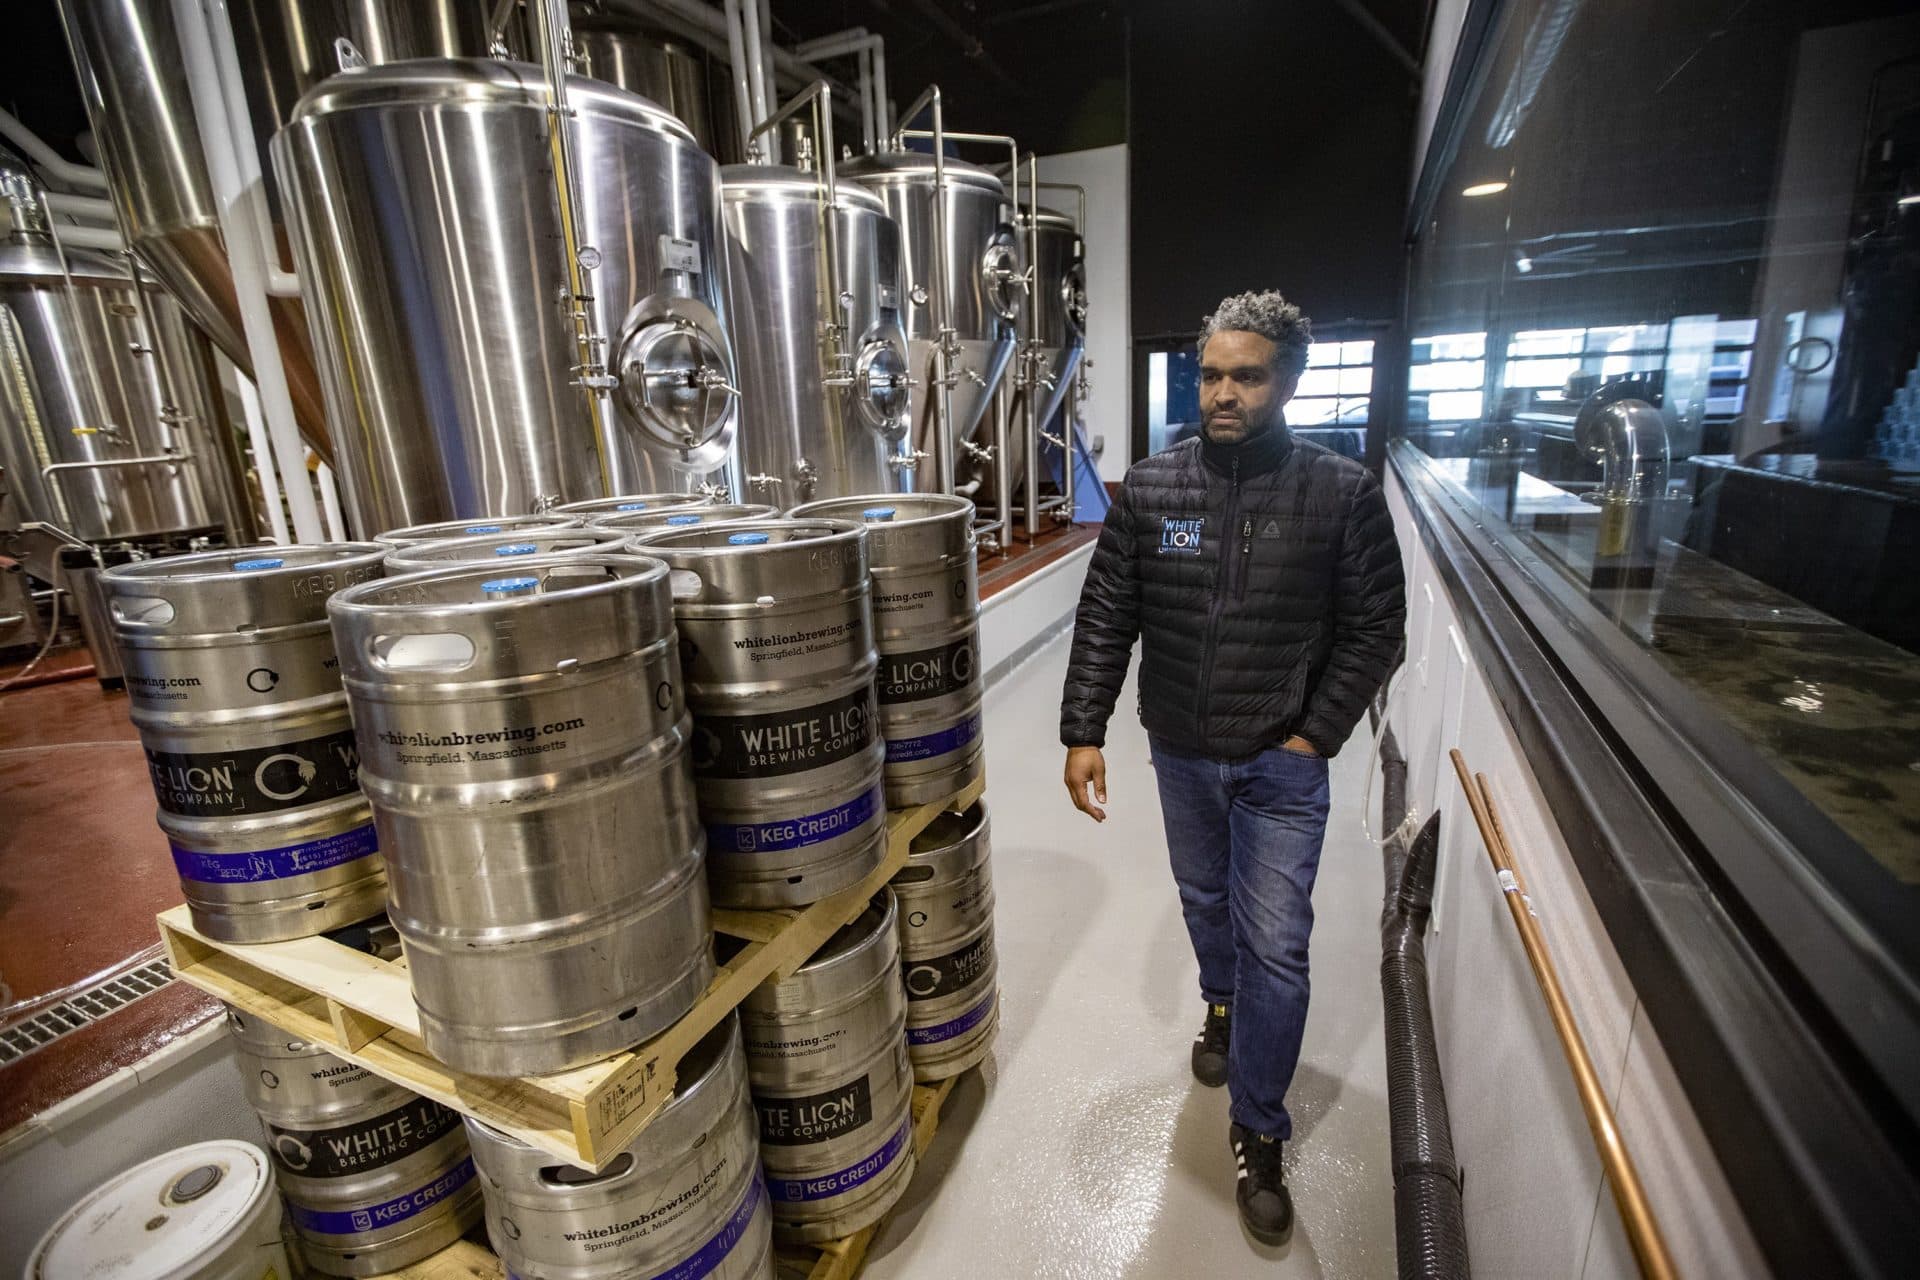 White Lion Brewing owner Ray Berry walks through the brand new facility, recently opened in October of 2020. (Jesse Costa/WBUR)